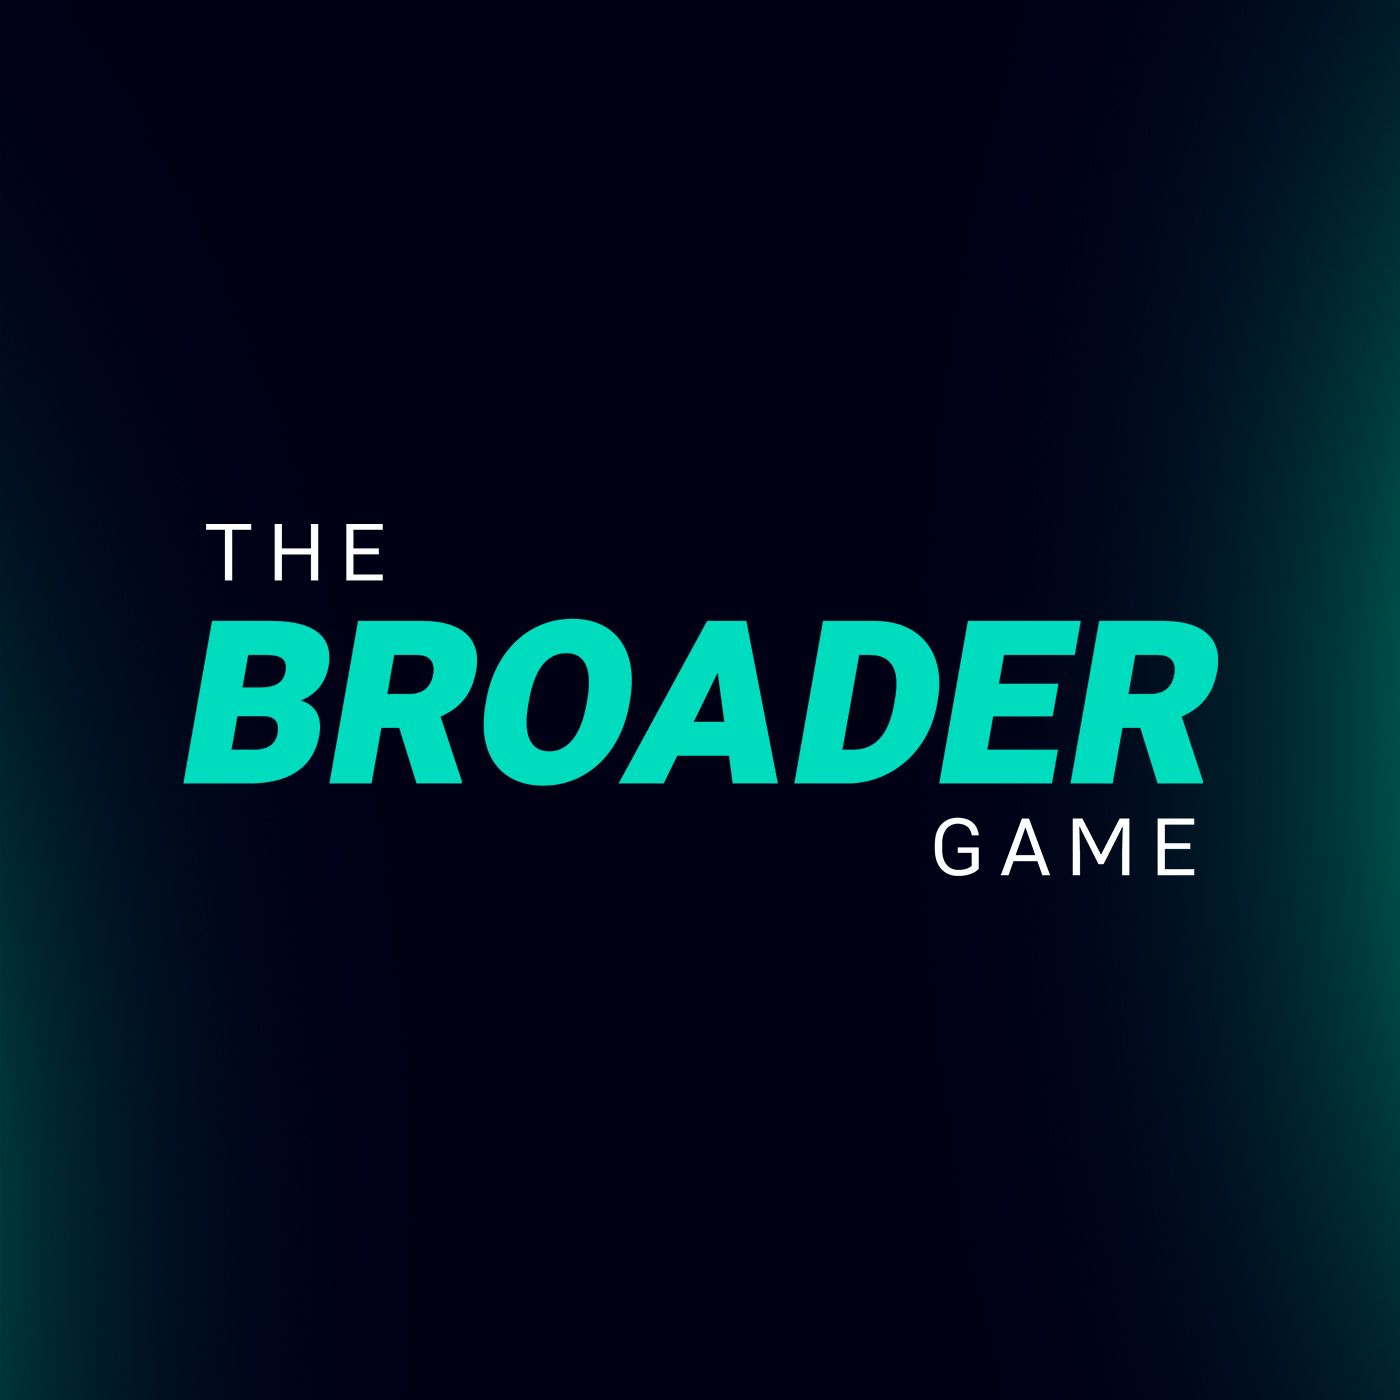 The Broader Game is back in 2020 and promises to be better than ever.